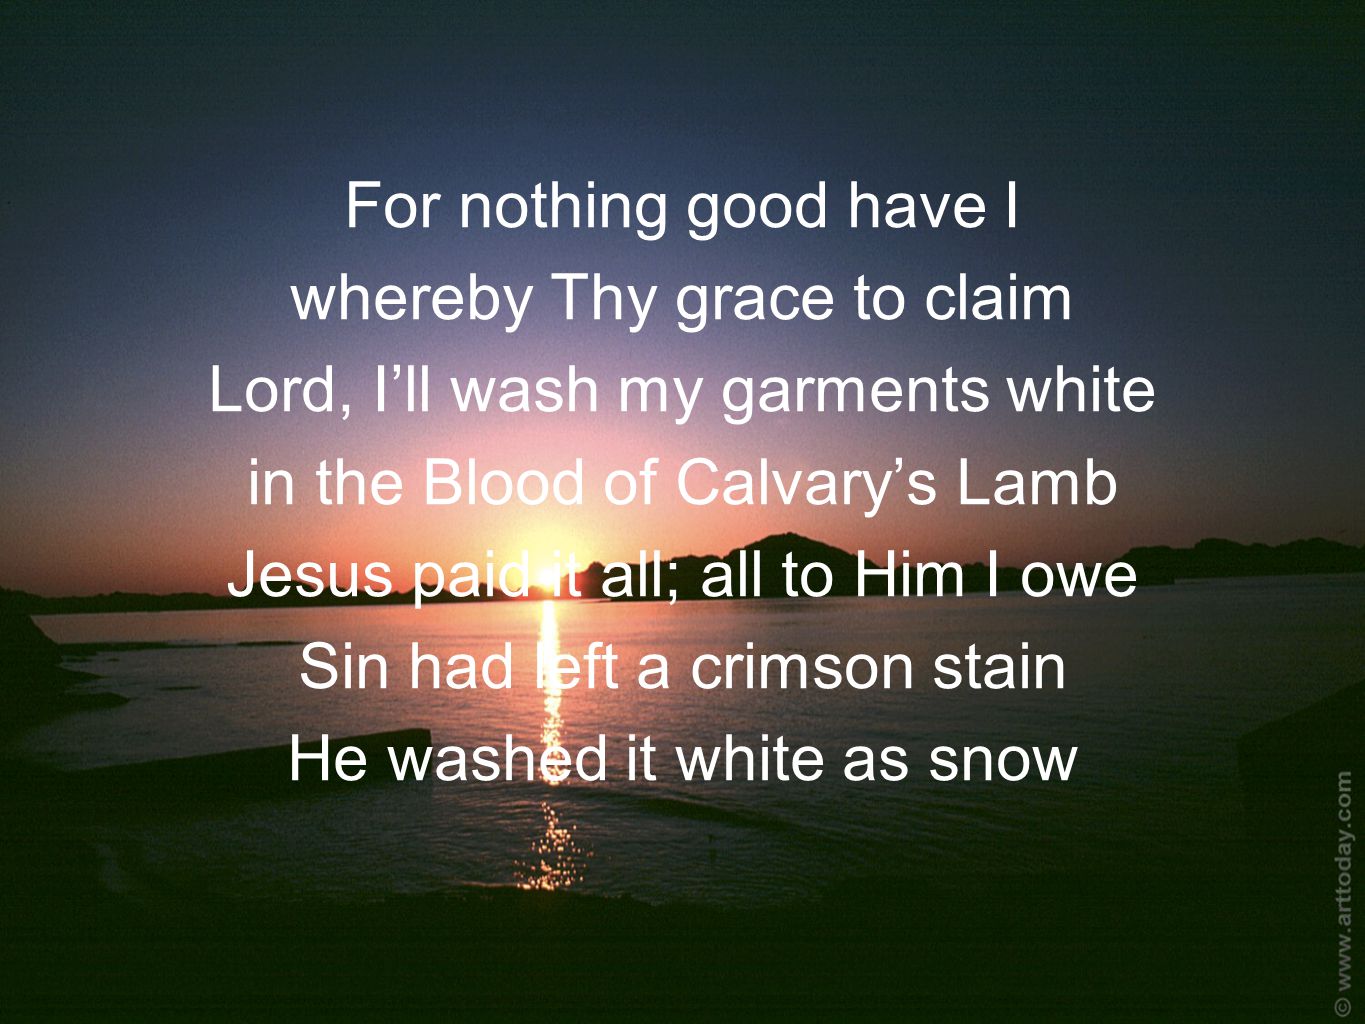 For nothing good have I whereby Thy grace to claim Lord, I’ll wash my garments white in the Blood of Calvary’s Lamb Jesus paid it all; all to Him I owe Sin had left a crimson stain He washed it white as snow